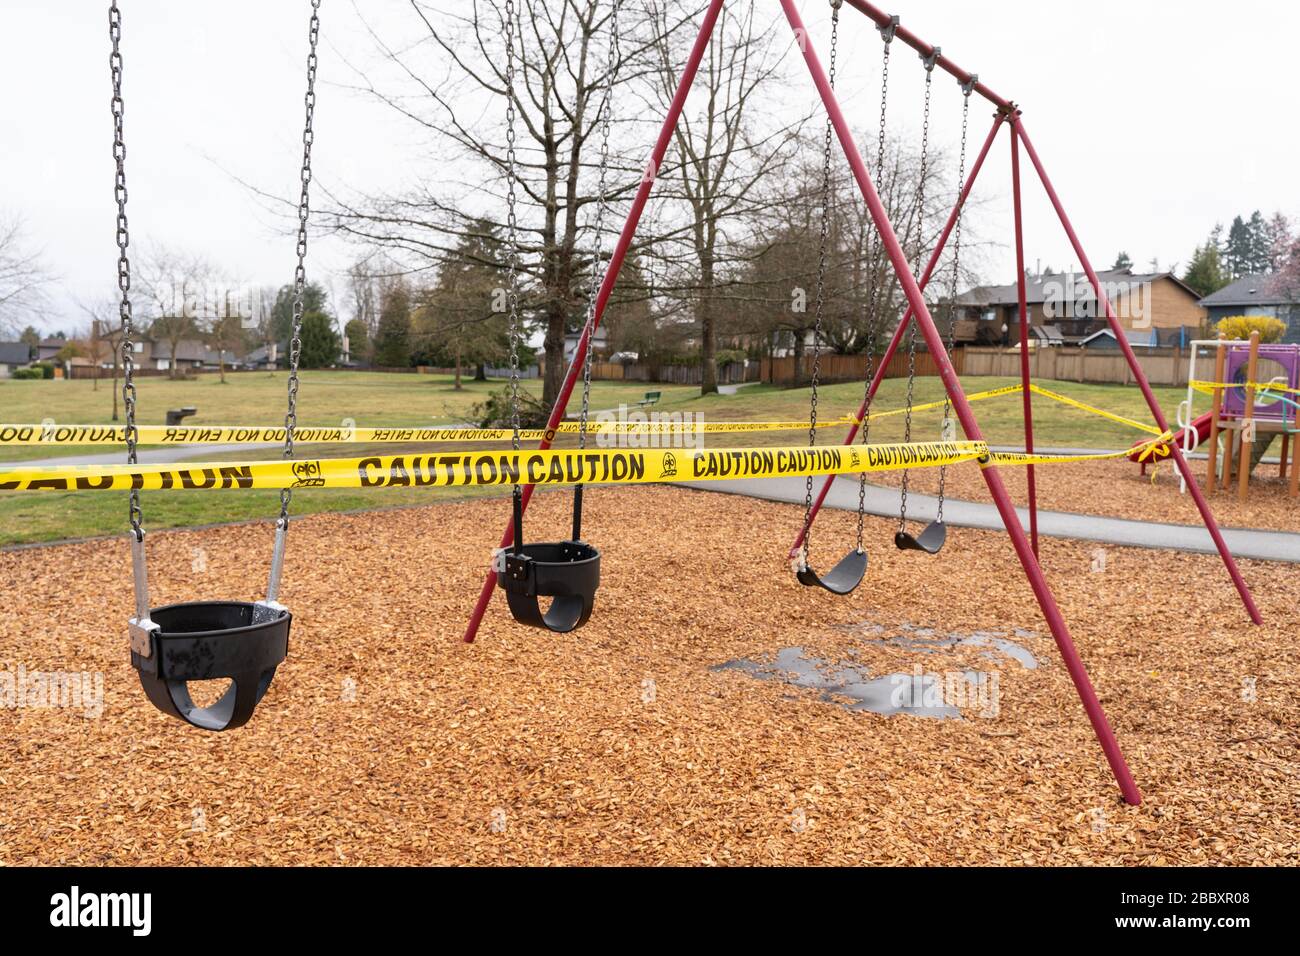 Canadian public warnings posted at school playgrounds during Covid-19 lockdown in  Maple Ridge, British Columbia on April 1st 2020 Stock Photo